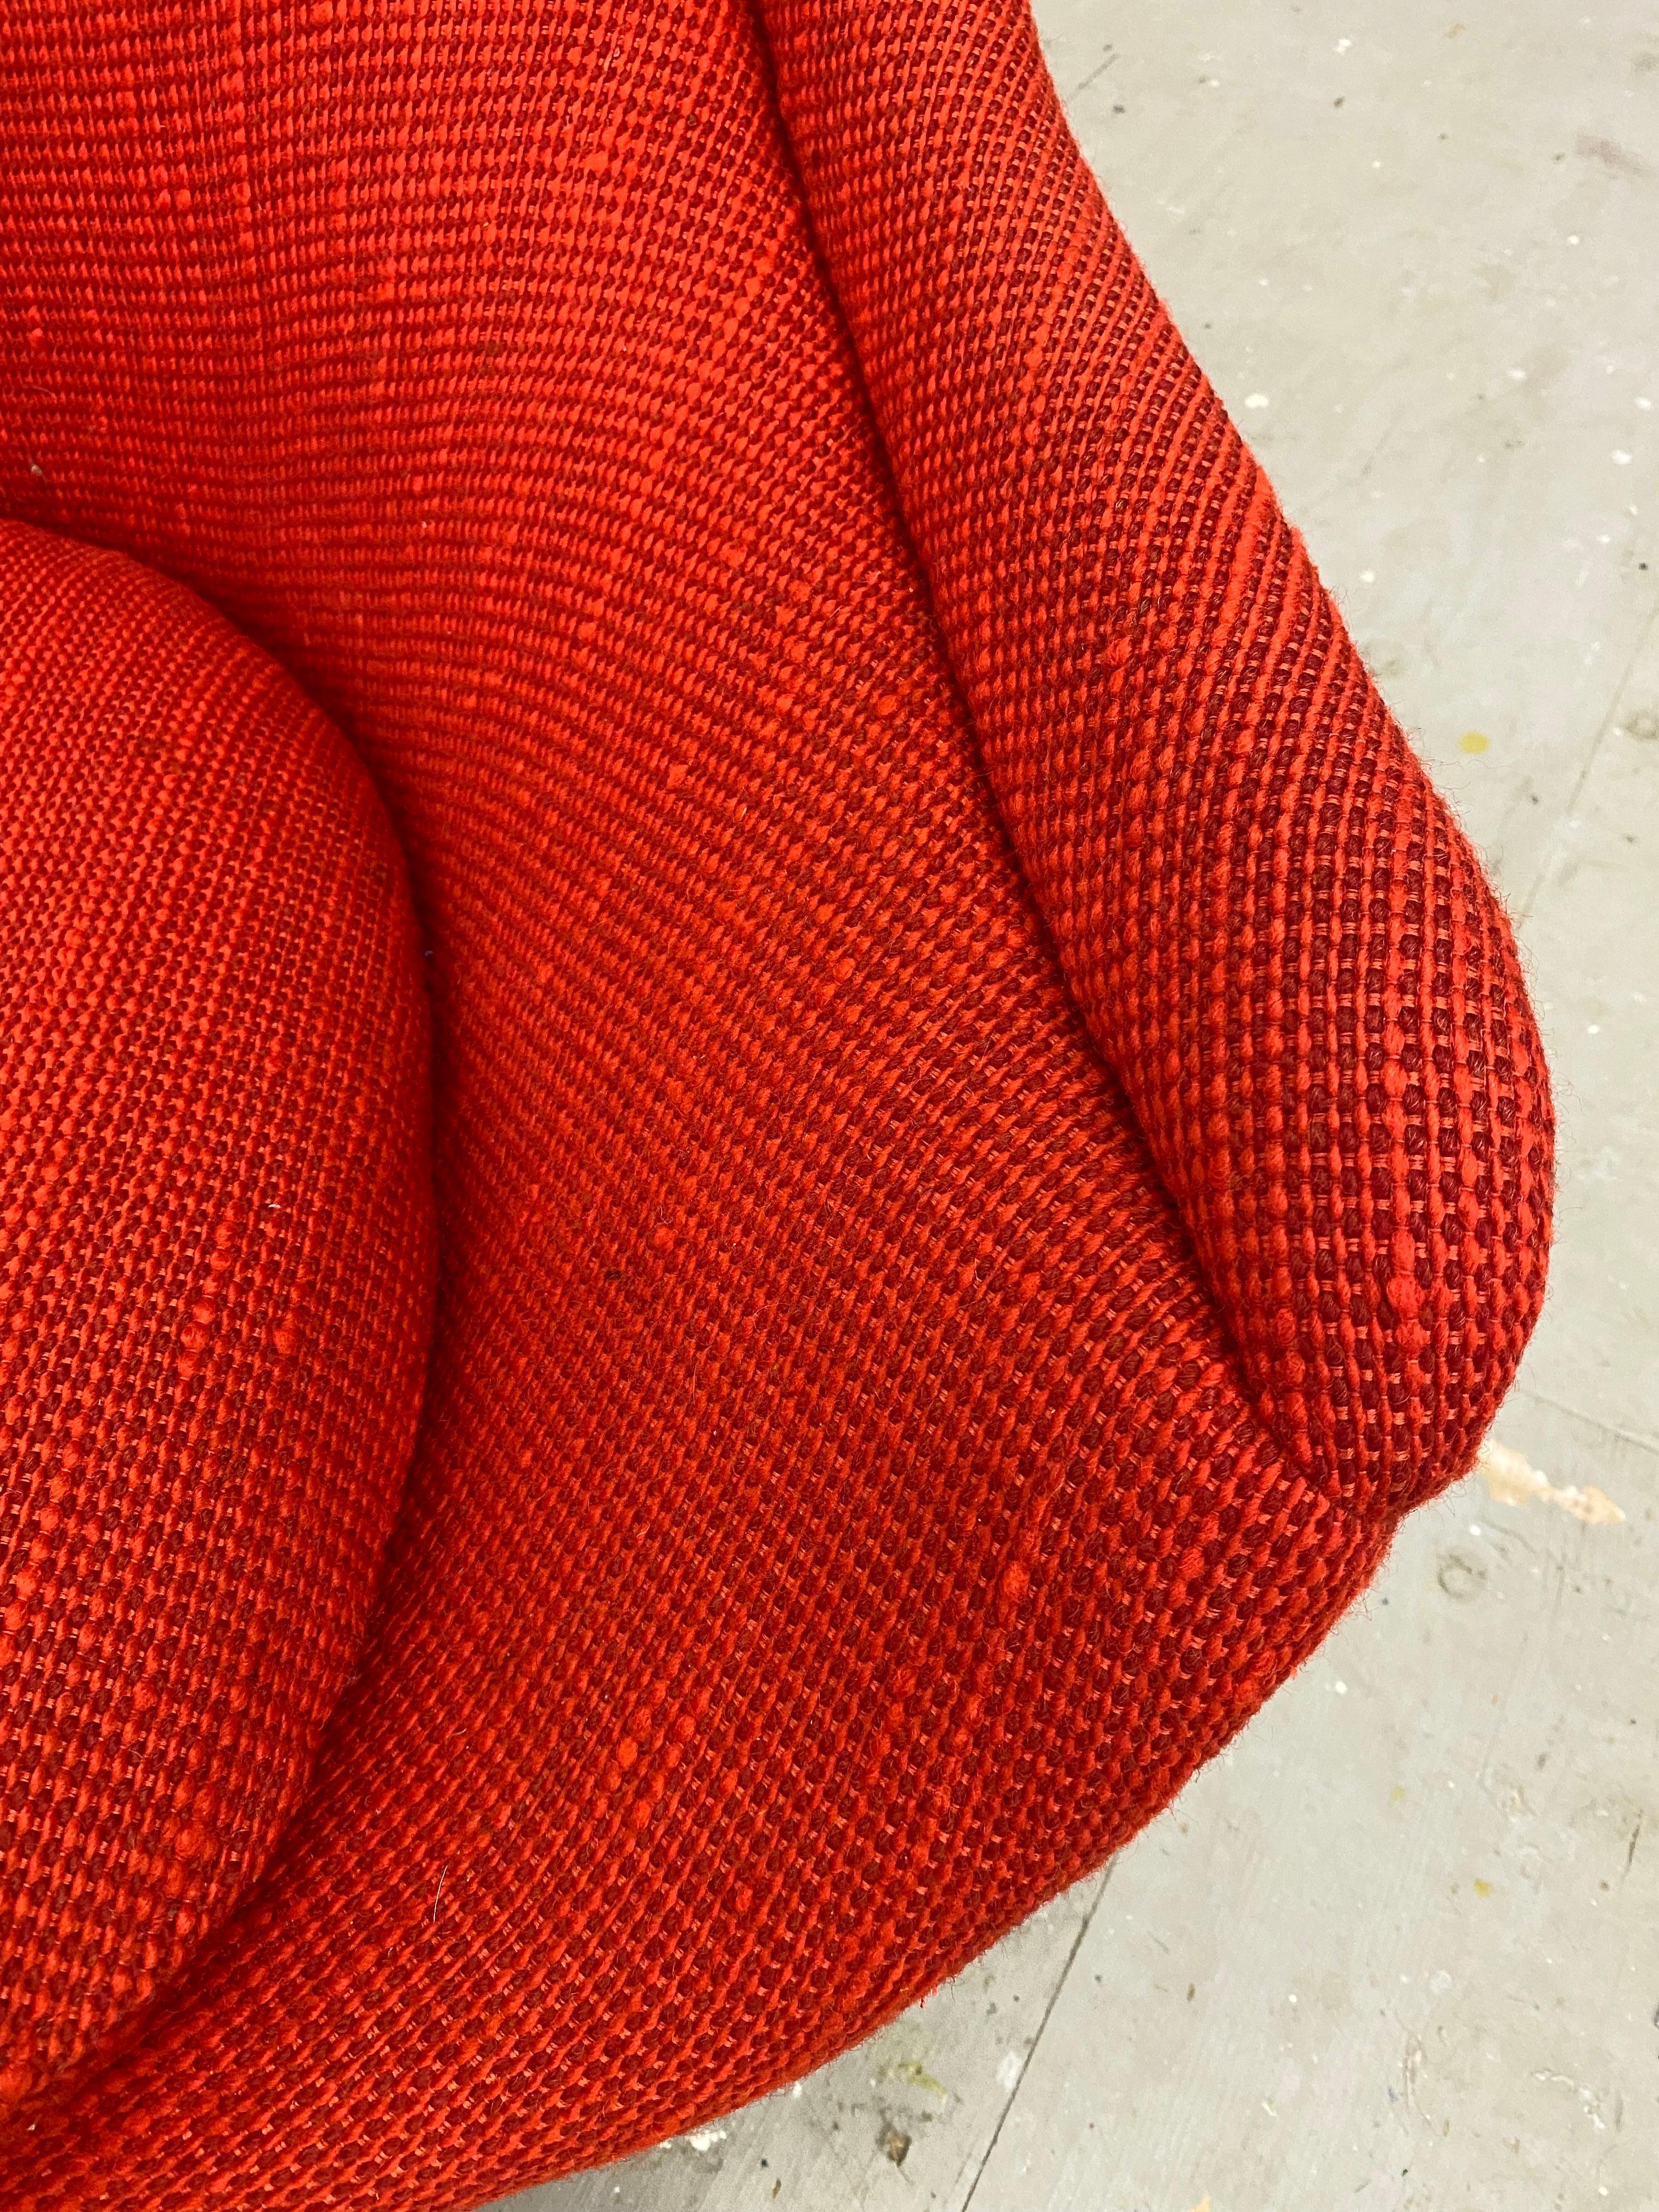 Warren Platner Easy Lounge Chair and Ottoman in Original Cado Red Fabric/ 1970 For Sale 6